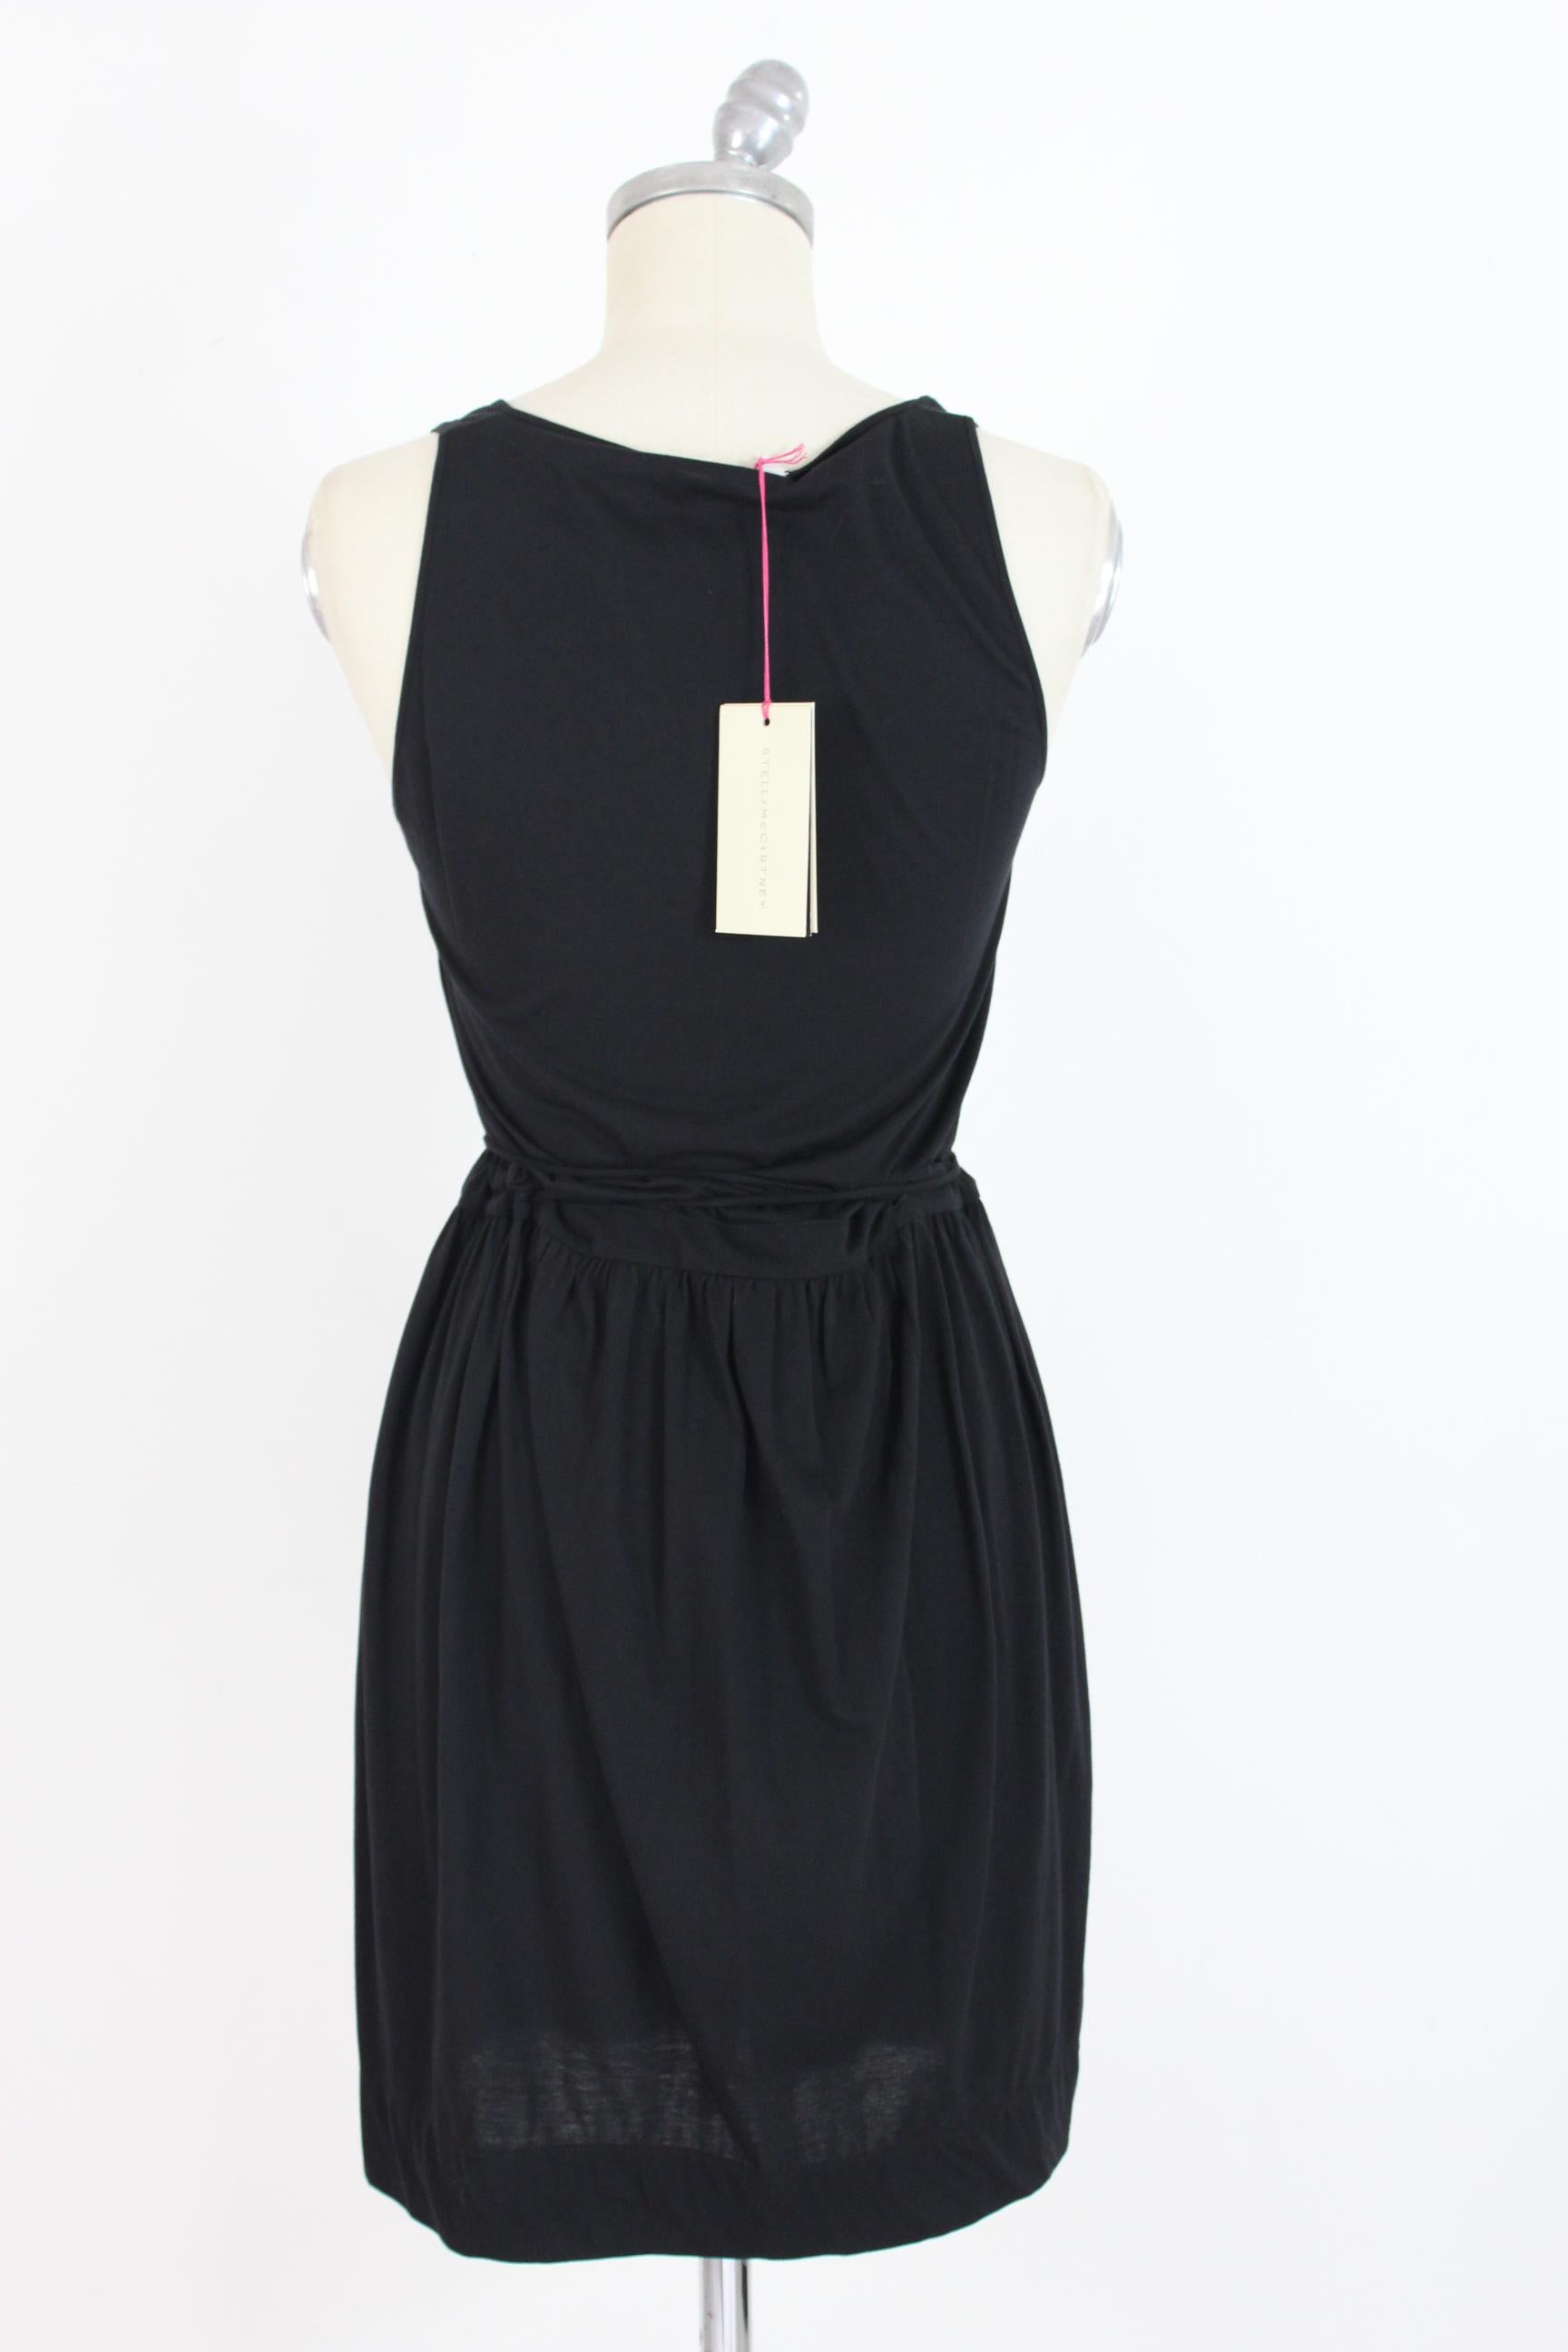 Stella McCartney 2000s sheath dress. Short, soft sleeveless dress. Stitching on the chest, flared skirt. Elastic waist belt that can be adjusted according to every need. Black color, 100% cotton. Made in Italy. New with tag.

Size: 42 It 8 Us 10